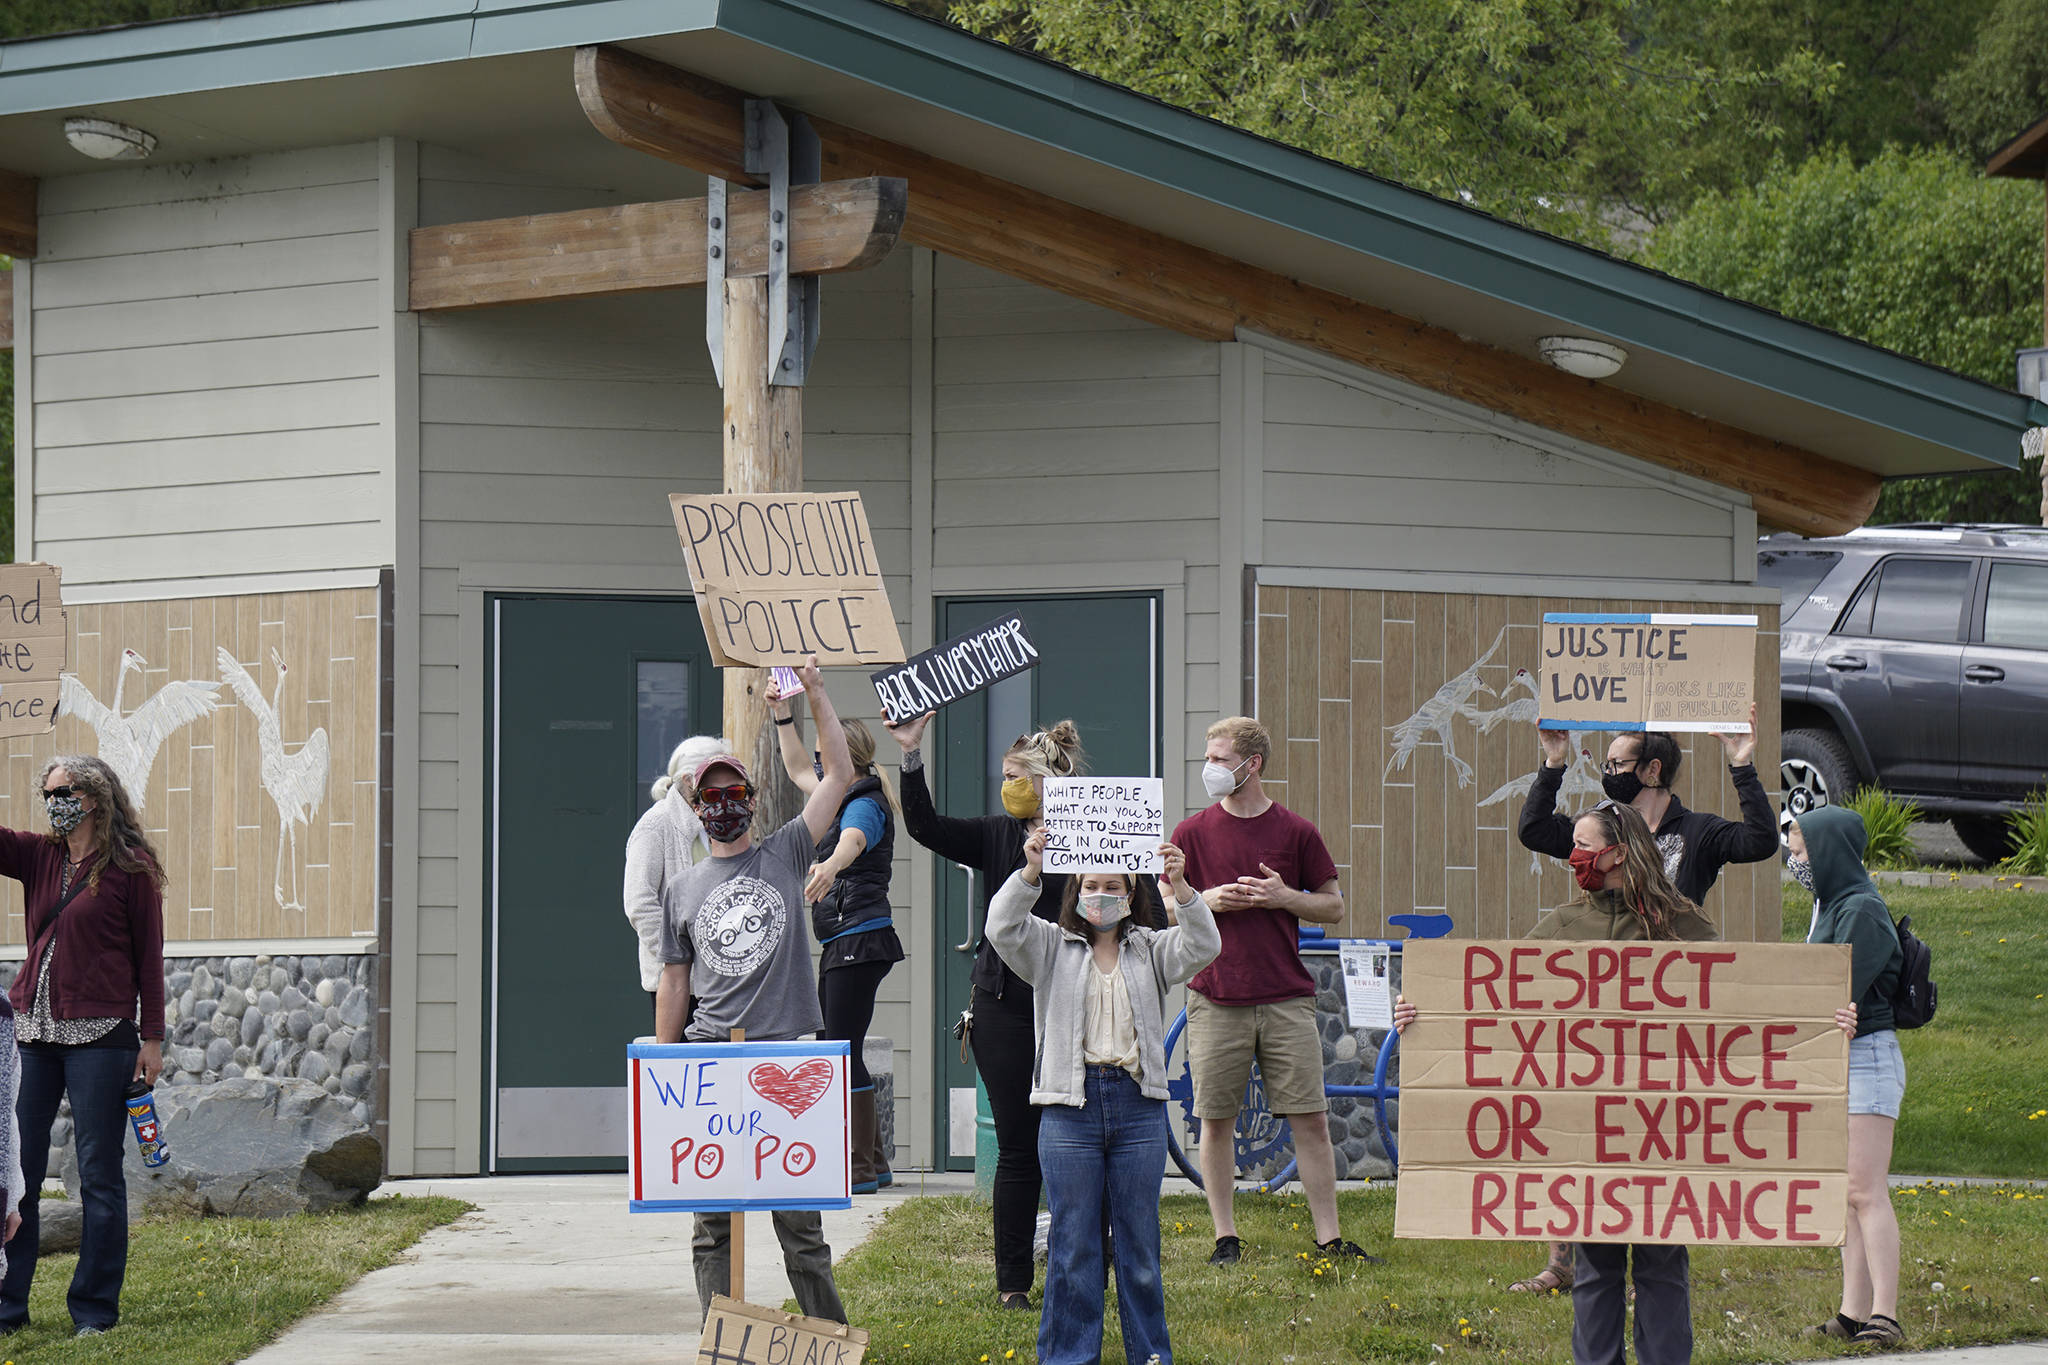 In front and from left to right, Aaron Ford, Karianna Ford and Jenni Stowe hold signs at a protest on Sunday, May 30, 2020, at WKFL Park in Homer, Alaska, in support of people of color who have been the subject of police violence, including George Floyd, a man who died May 25, 2020, in a police encounter in Minneapolis, Minnesota. In addition to the “We (heart) our po po” sign — “po po” is slang for “police” — there also was a sign that read “Thank you HPD.” (Photo by Michael Armstrong/Homer News)